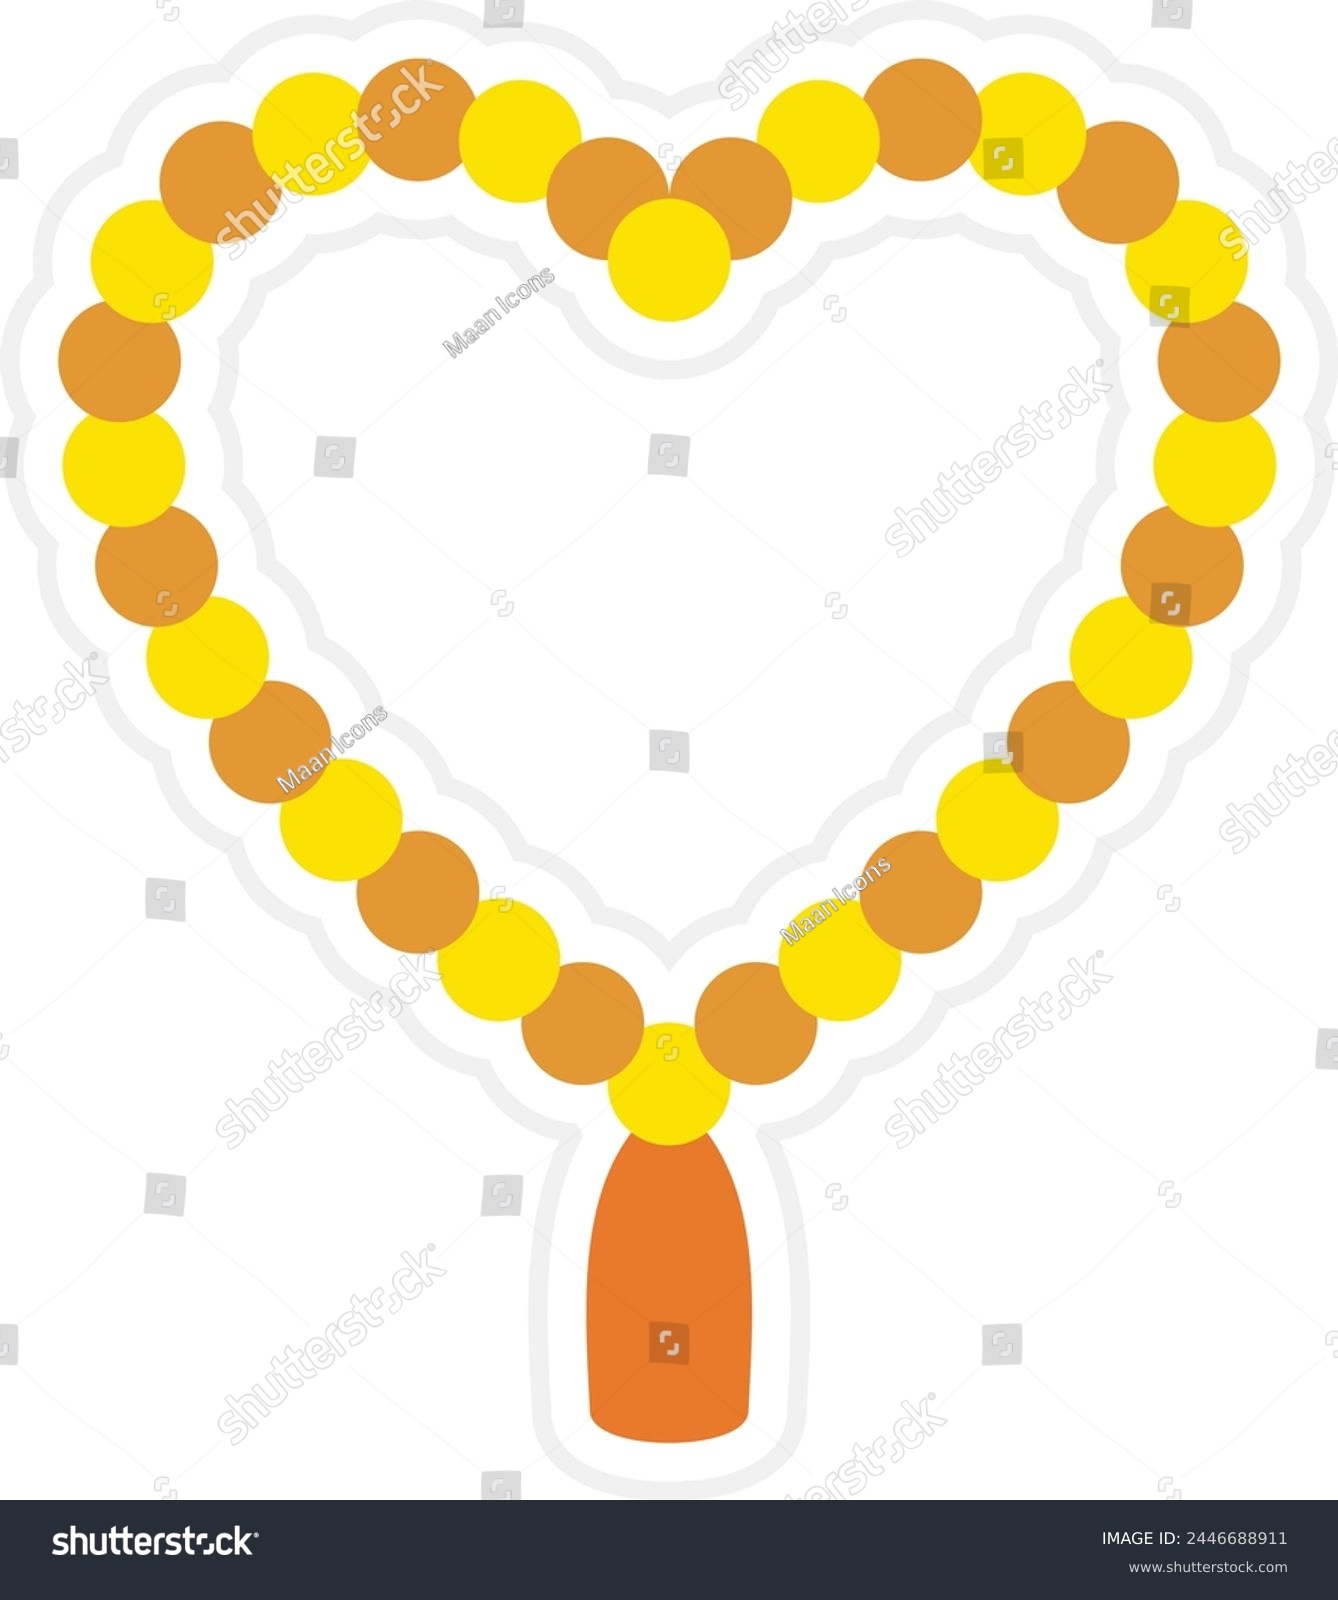 SVG of Tasbih vector icon. Can be used for printing, mobile and web applications. svg